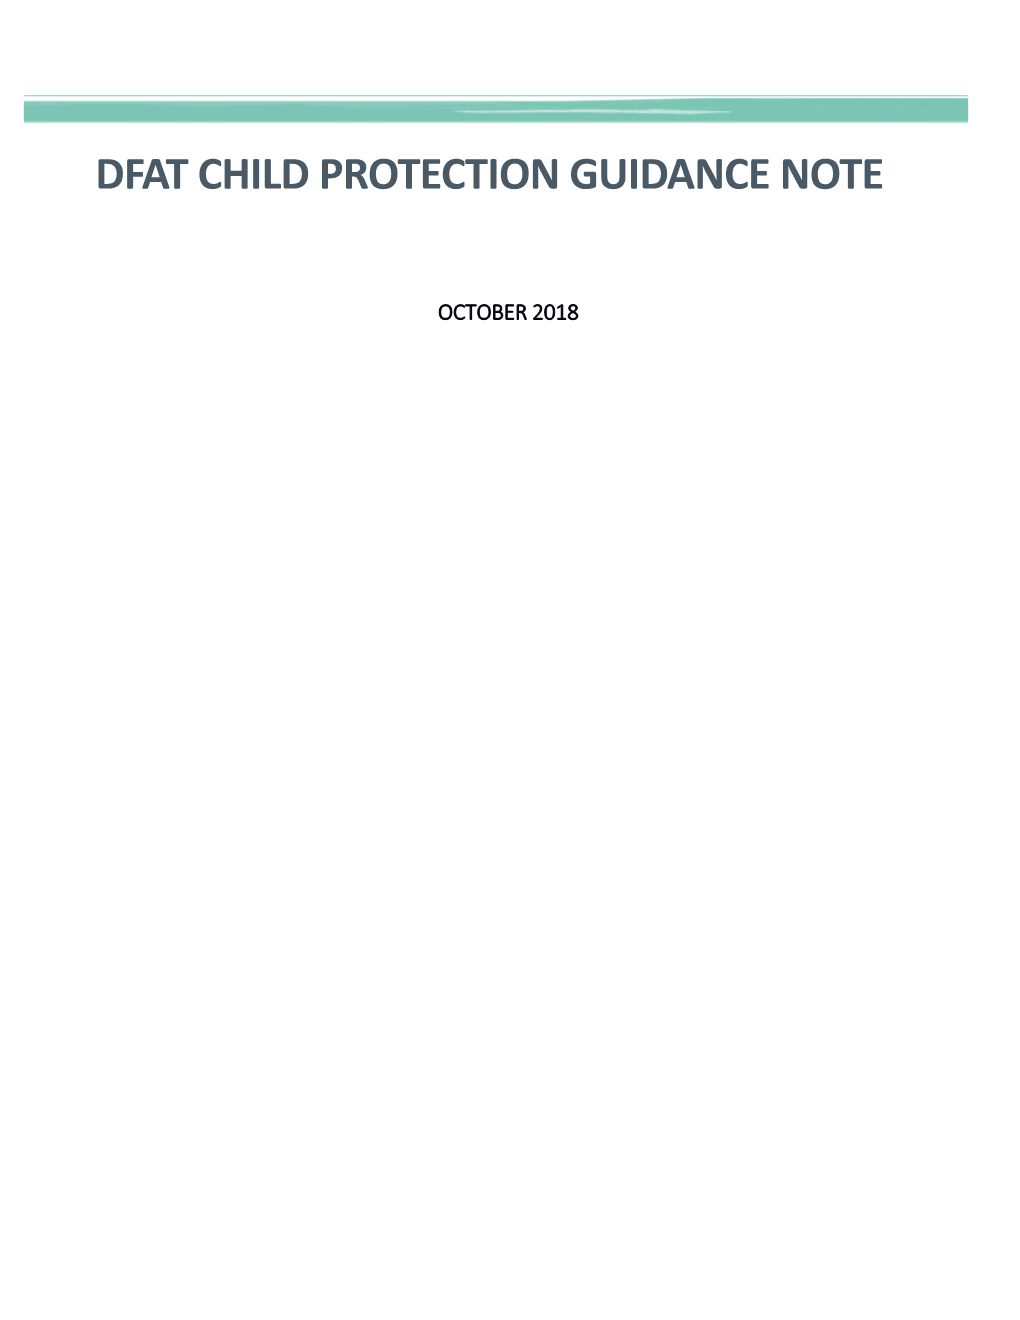 DFAT Child Protection Guidance Note Violence Against Women Programs